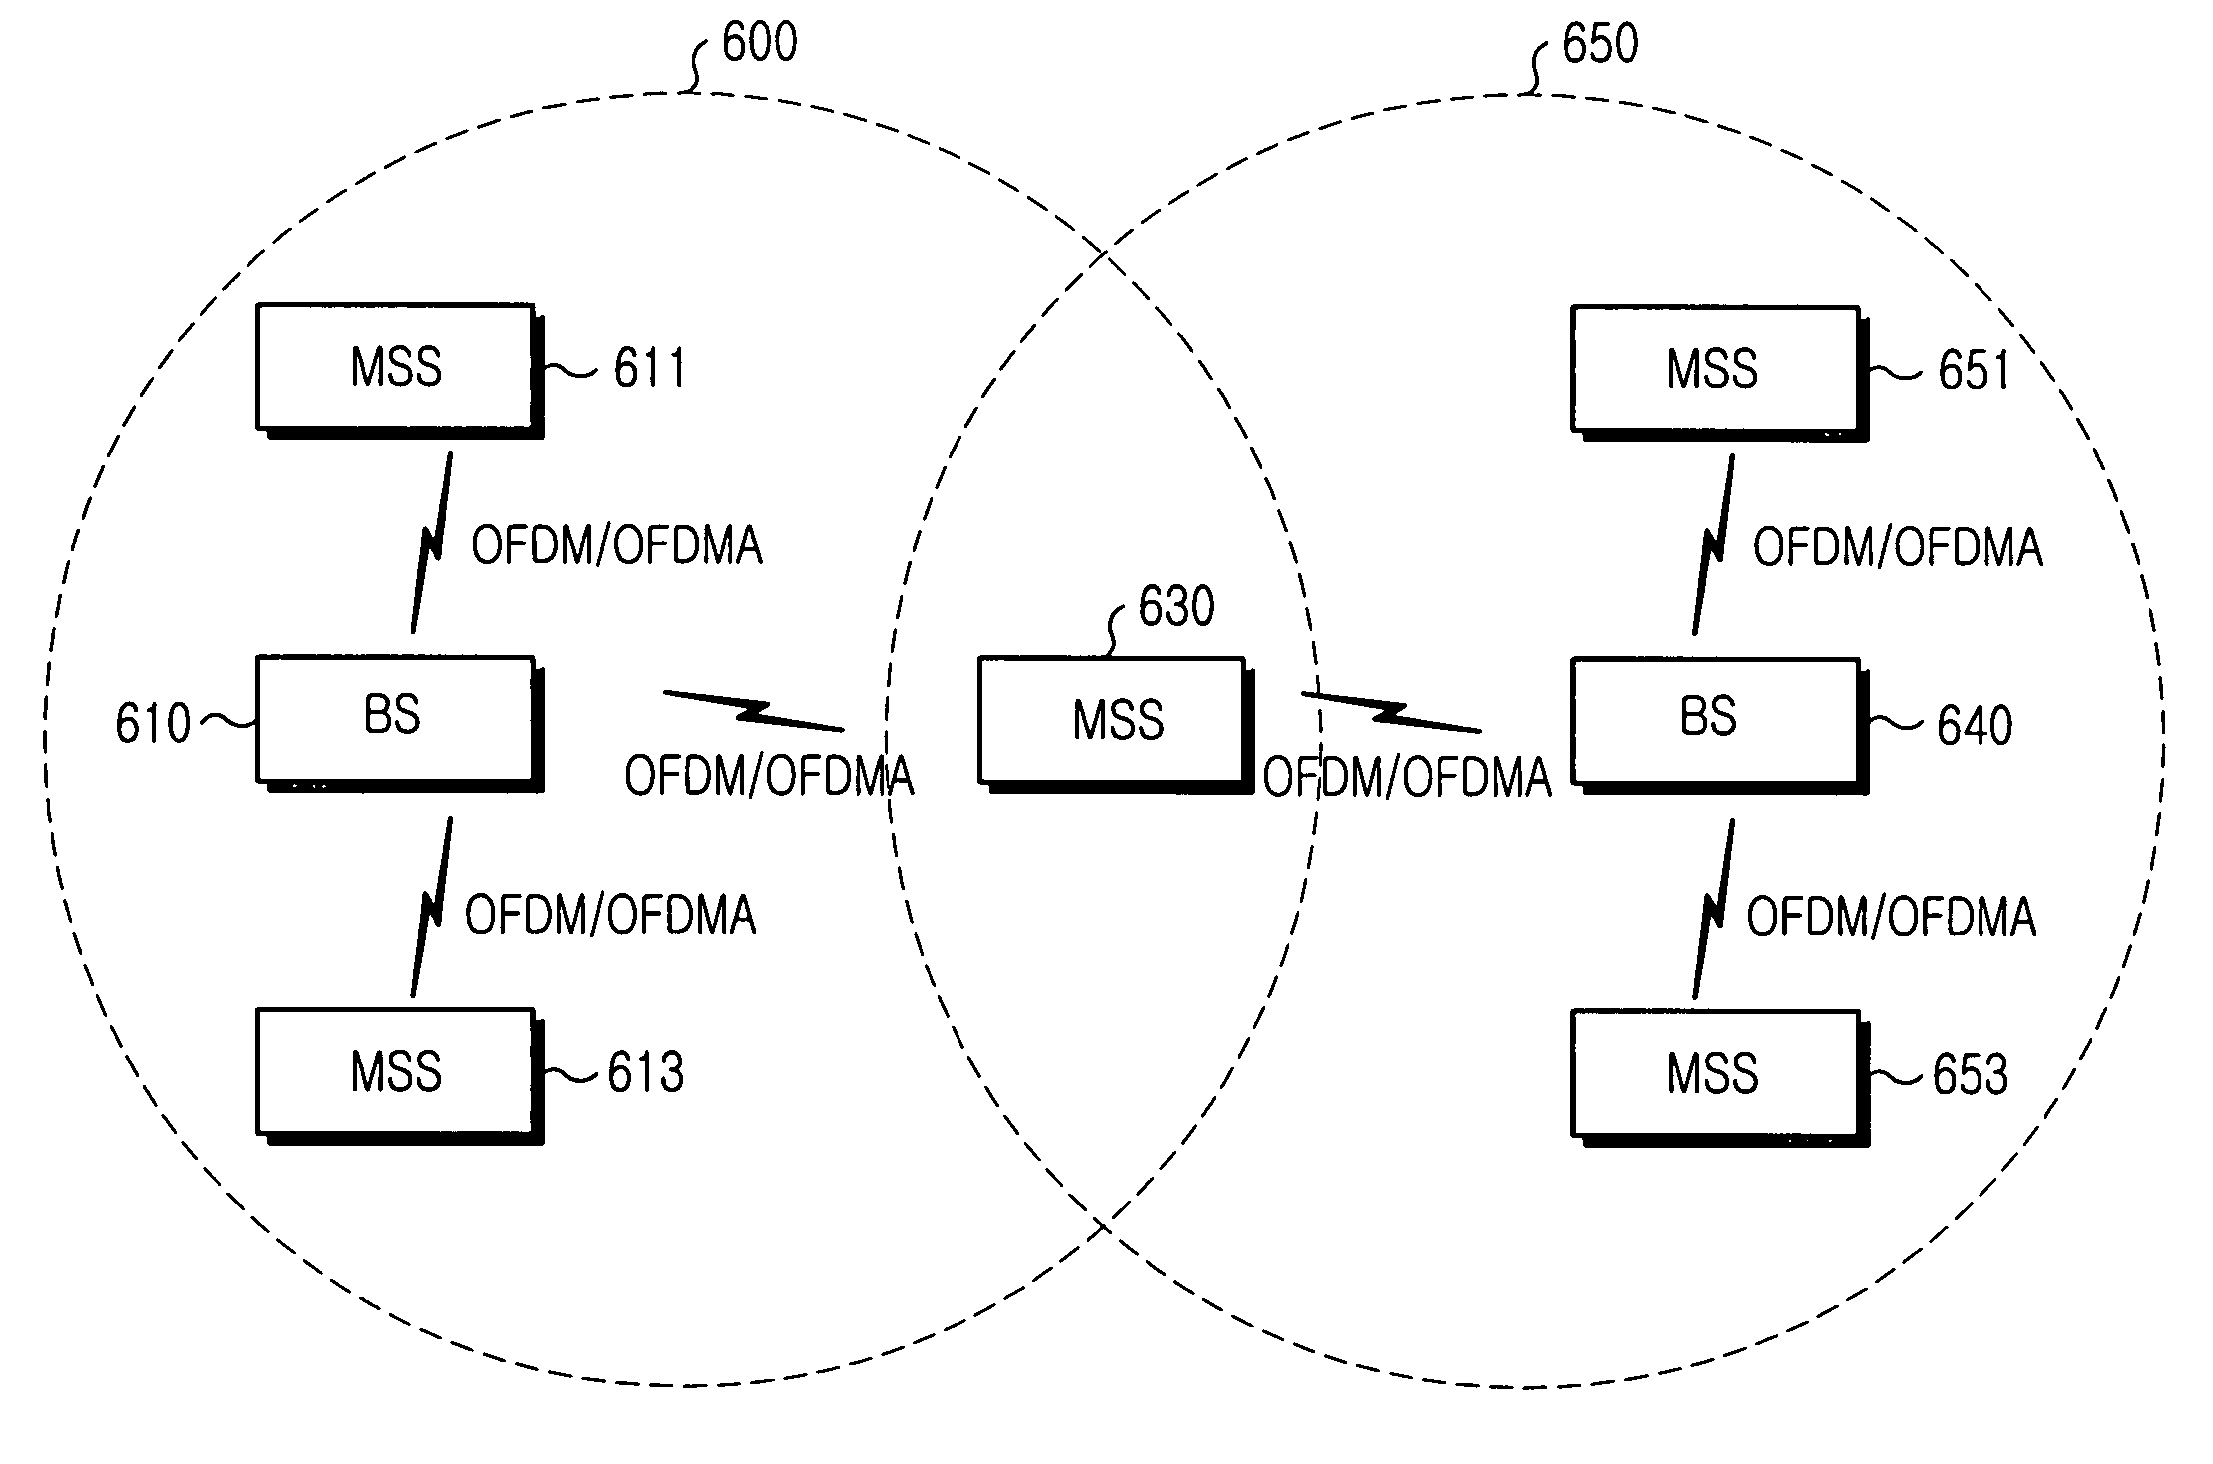 Method for measuring and reporting channel quality in a broadband wireless access communication system